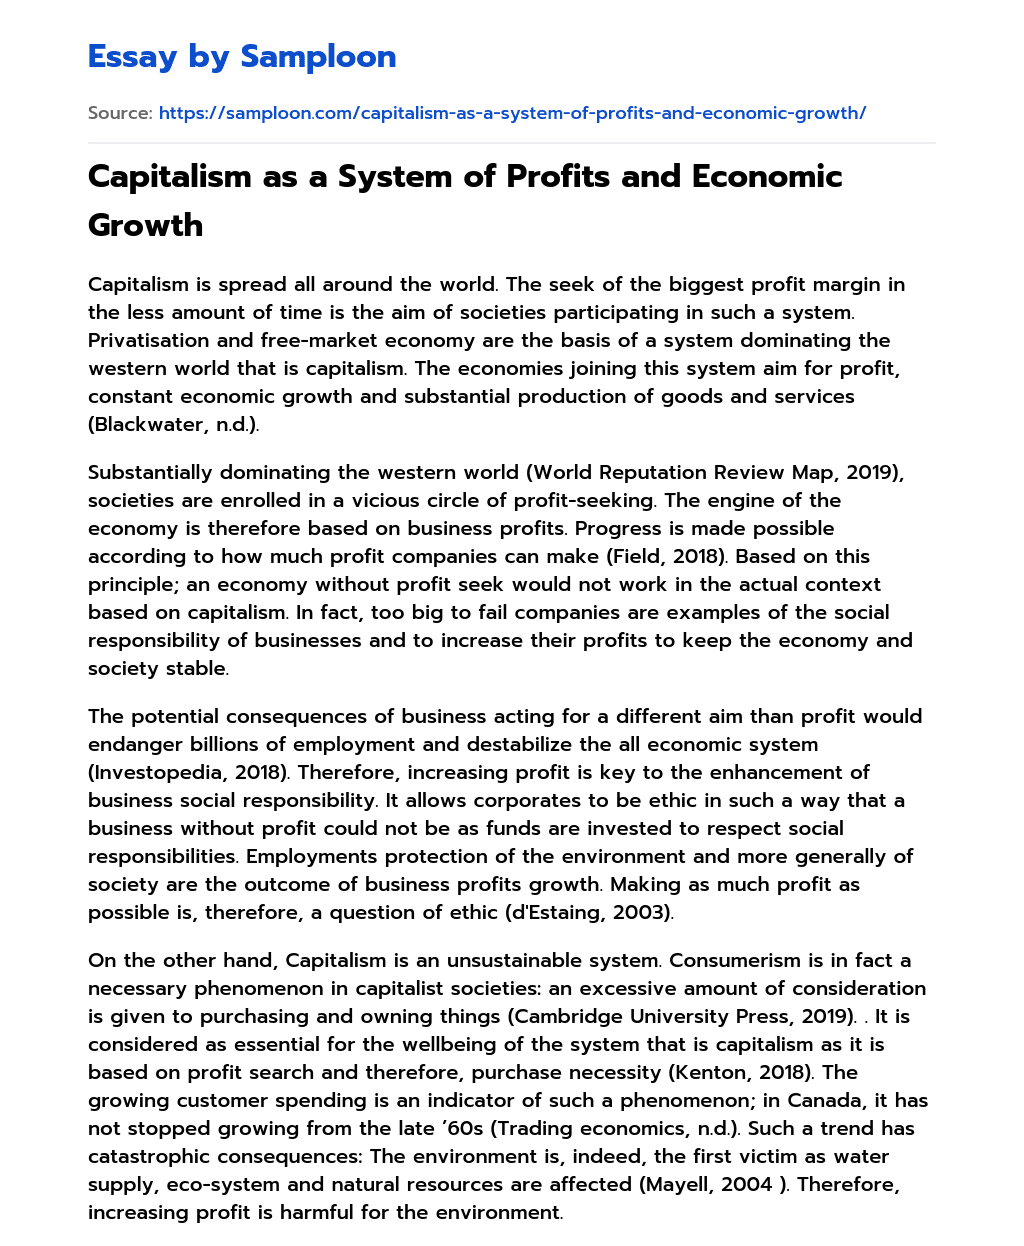 Capitalism as a System of Profits and Economic Growth essay